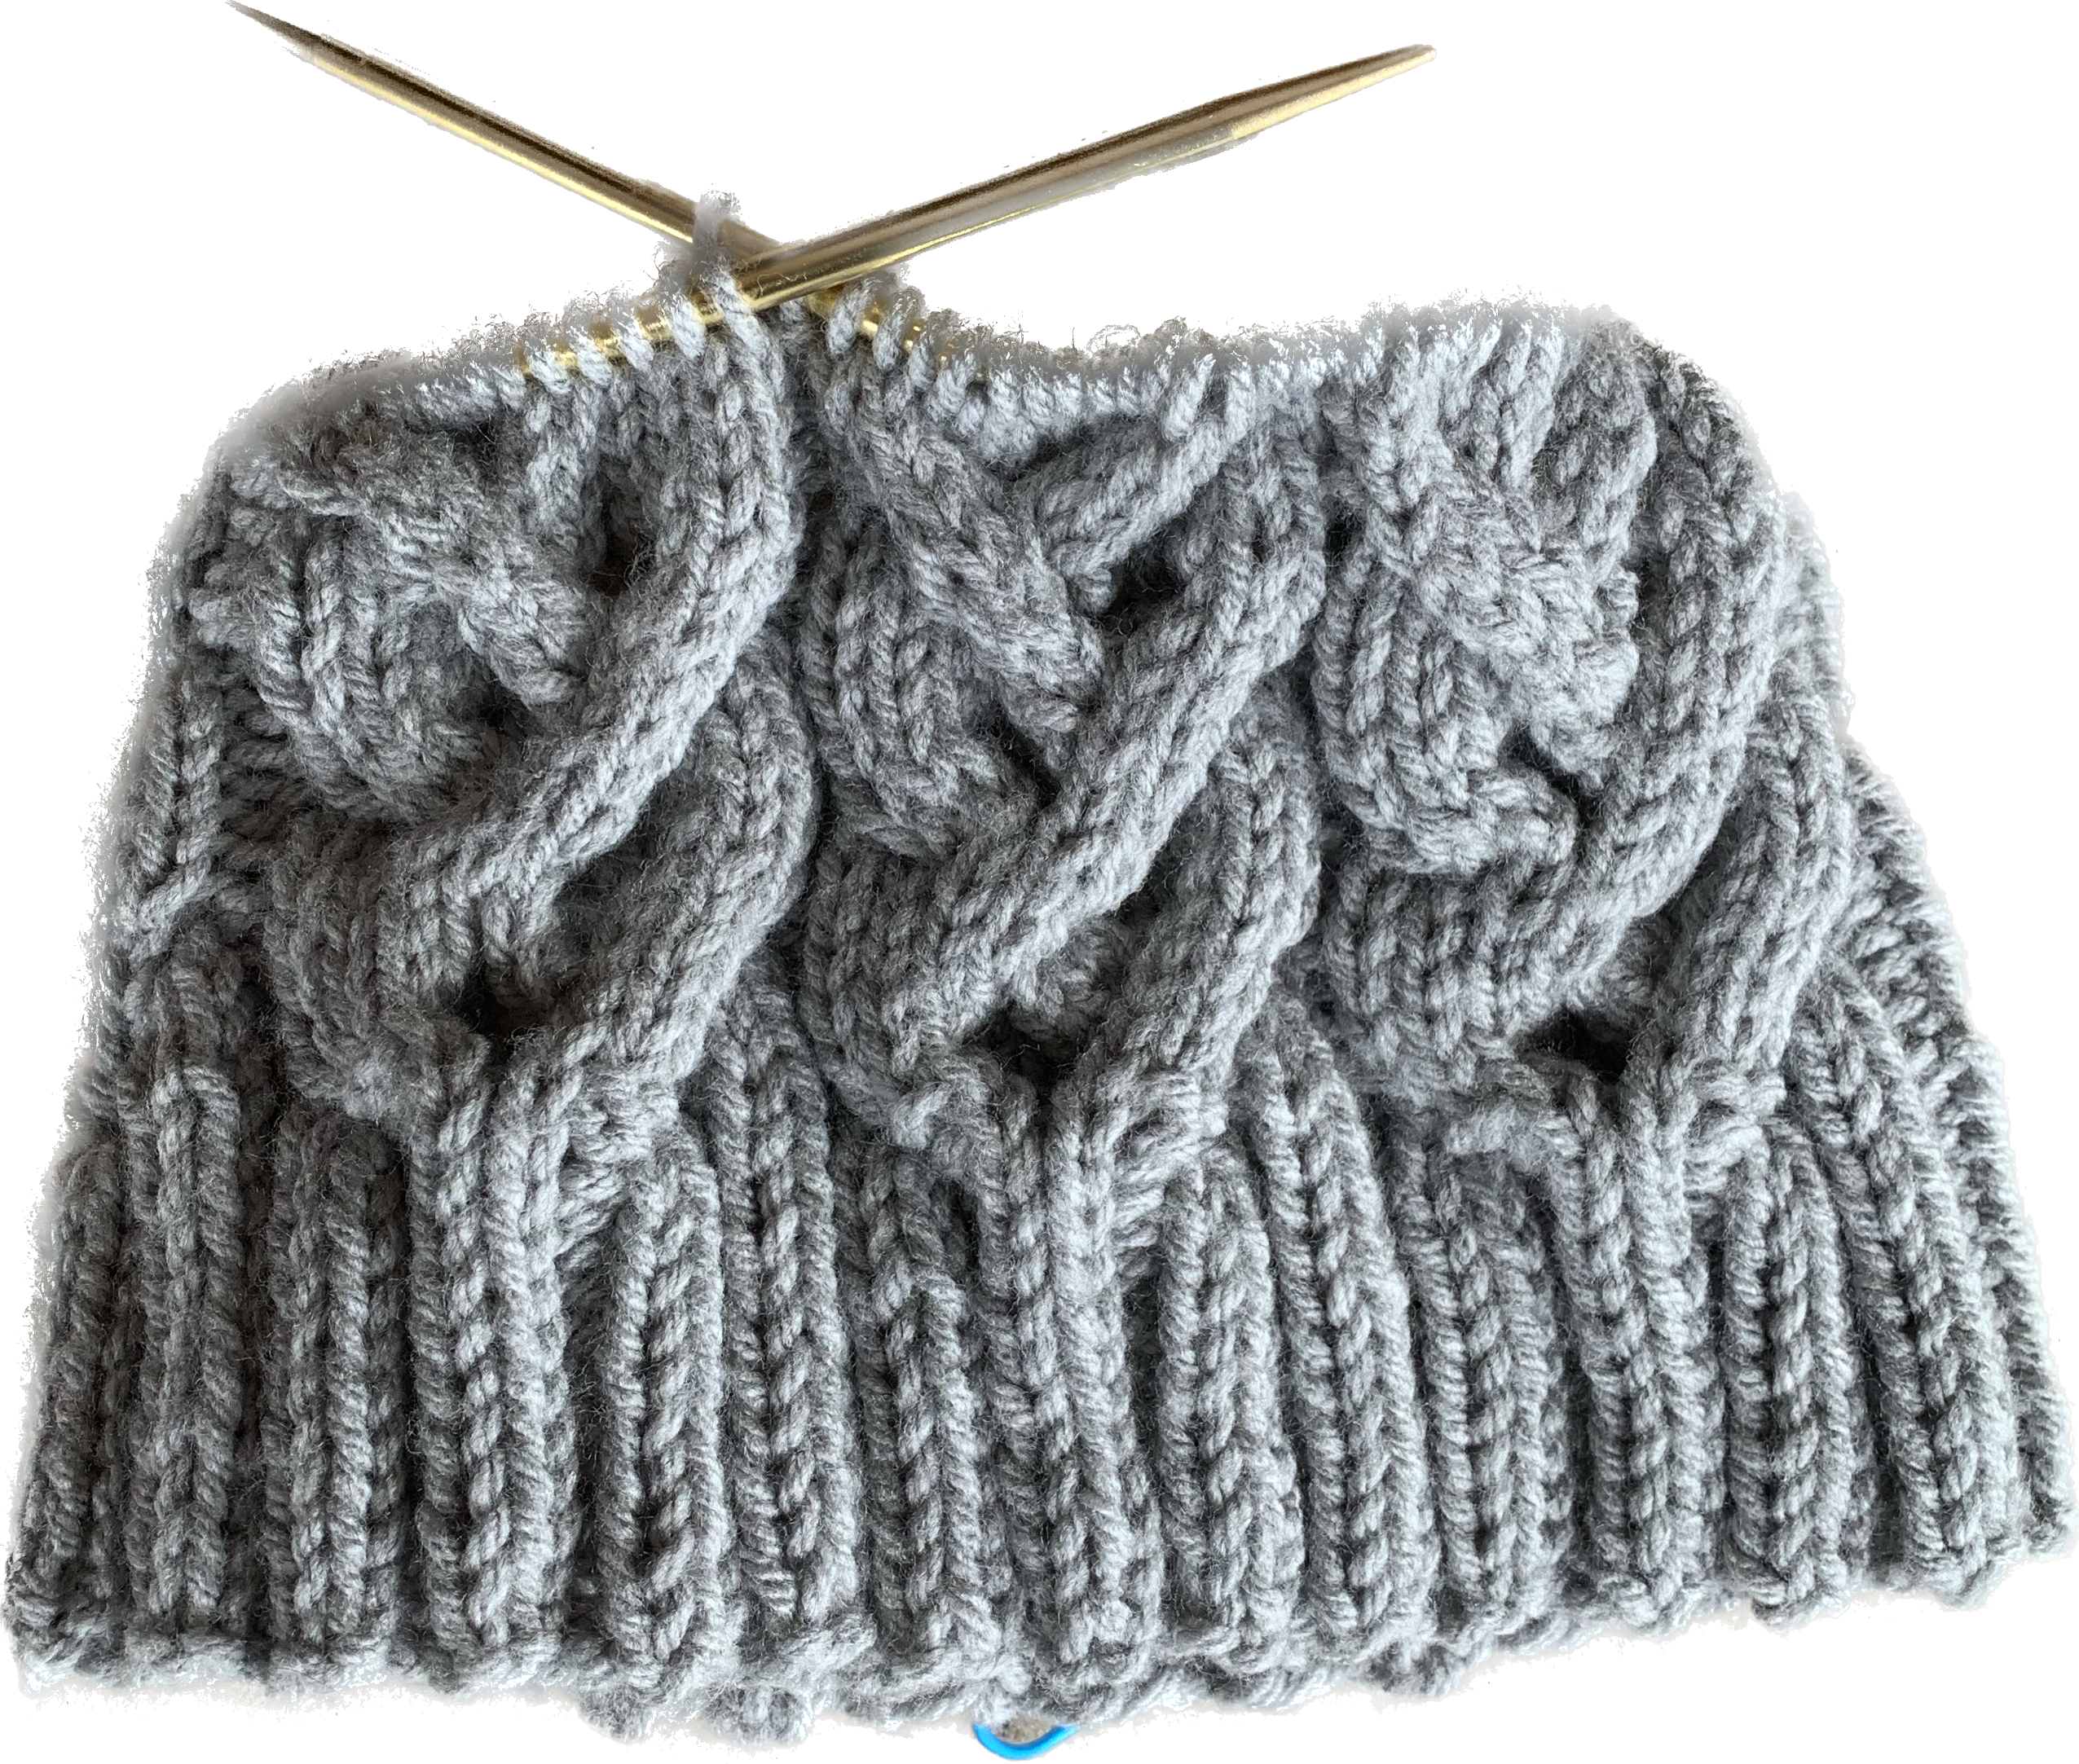 a gray knitted hat with cables